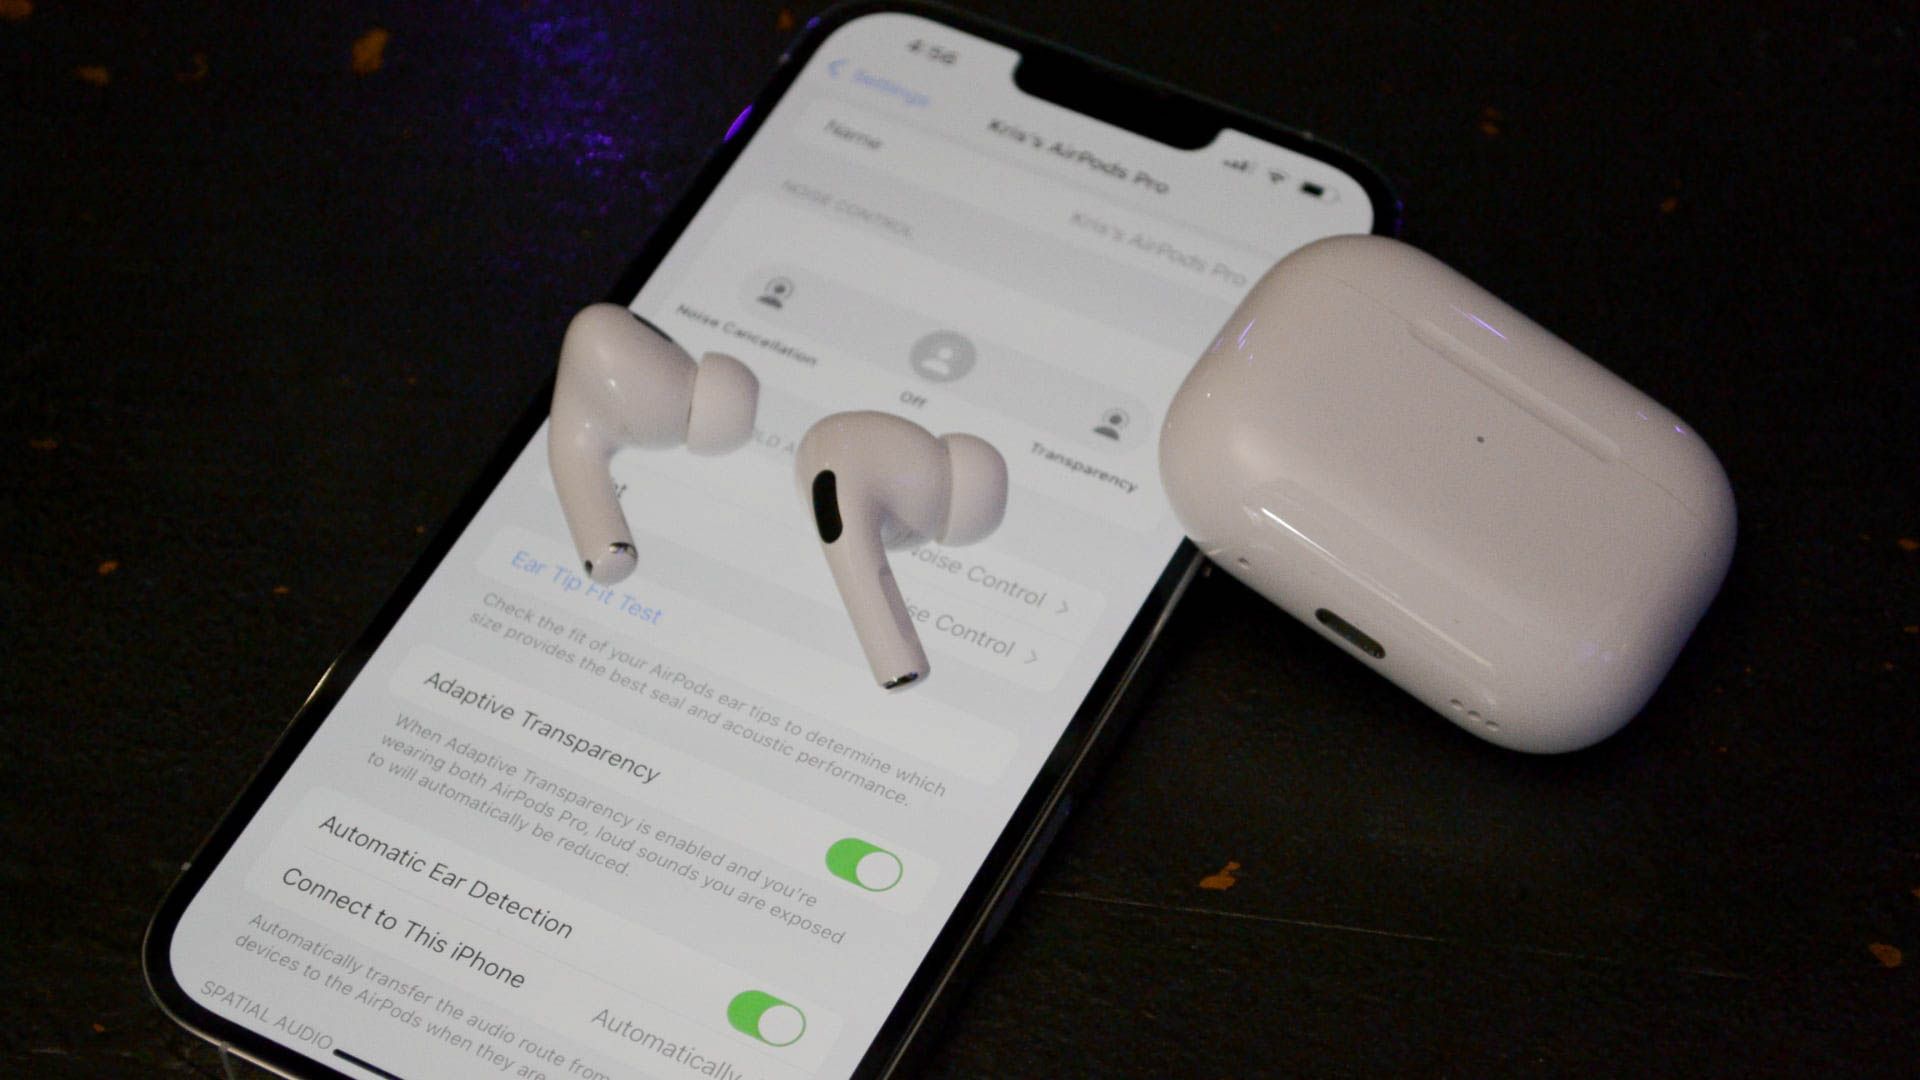 AirPods Pro Adaptive Audio: what it is and how it works